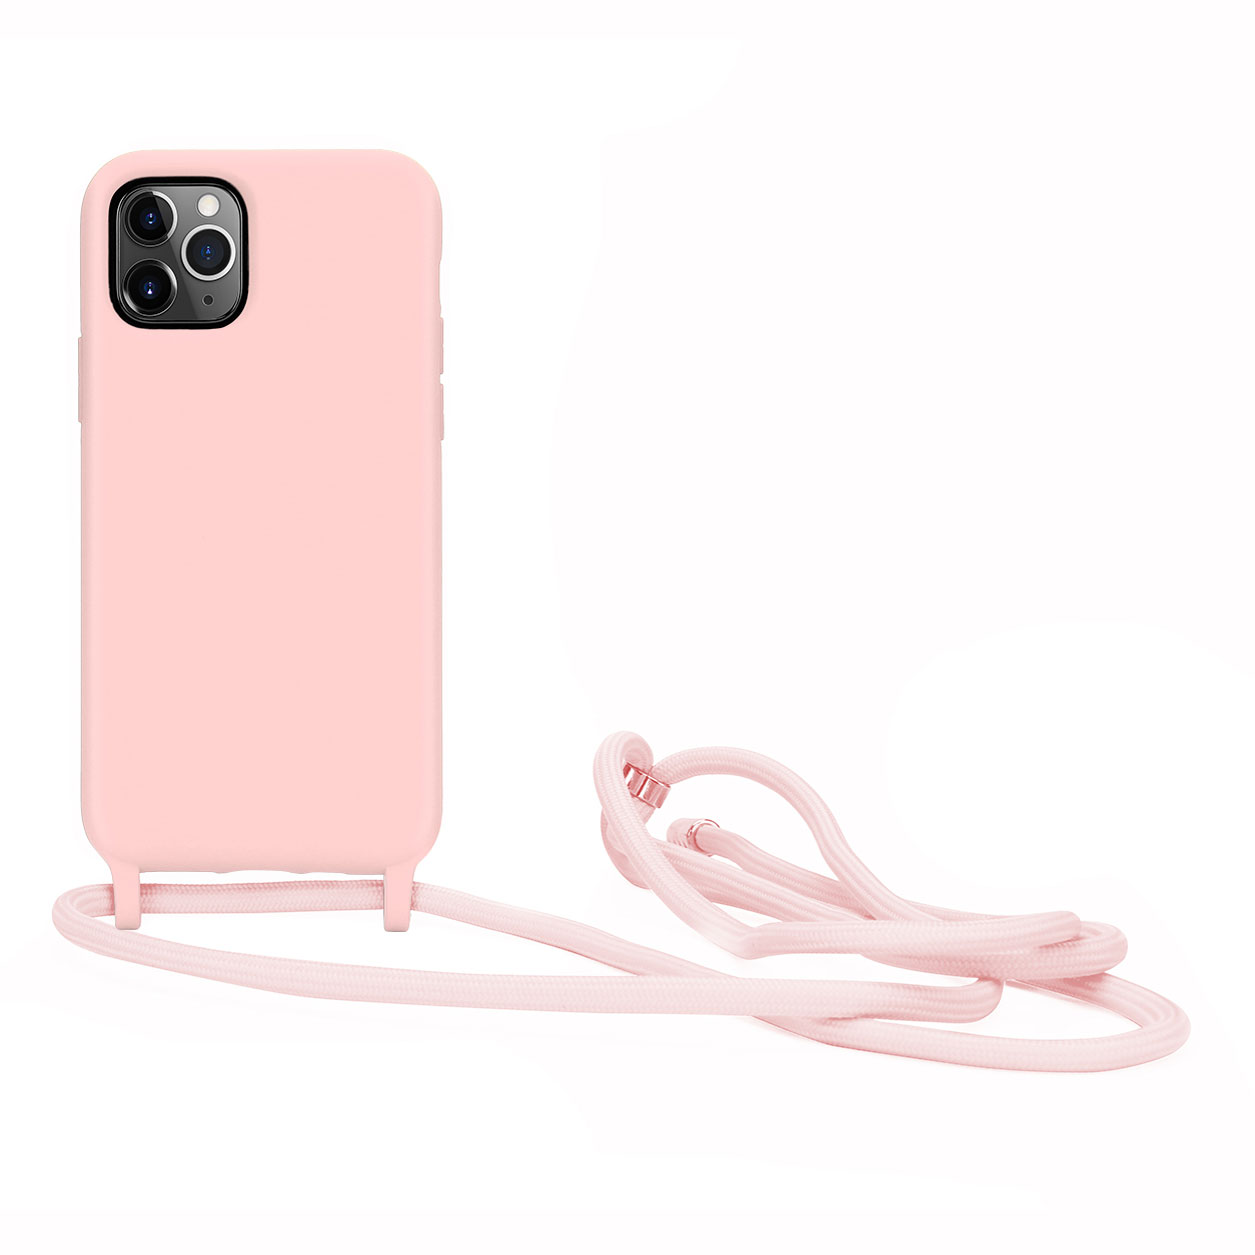 Crossbody Lanyard Neck Strap Adjustable NECKLACE Pro Silicone Case Bag for iPhone 12 / 12 Pro 6.1